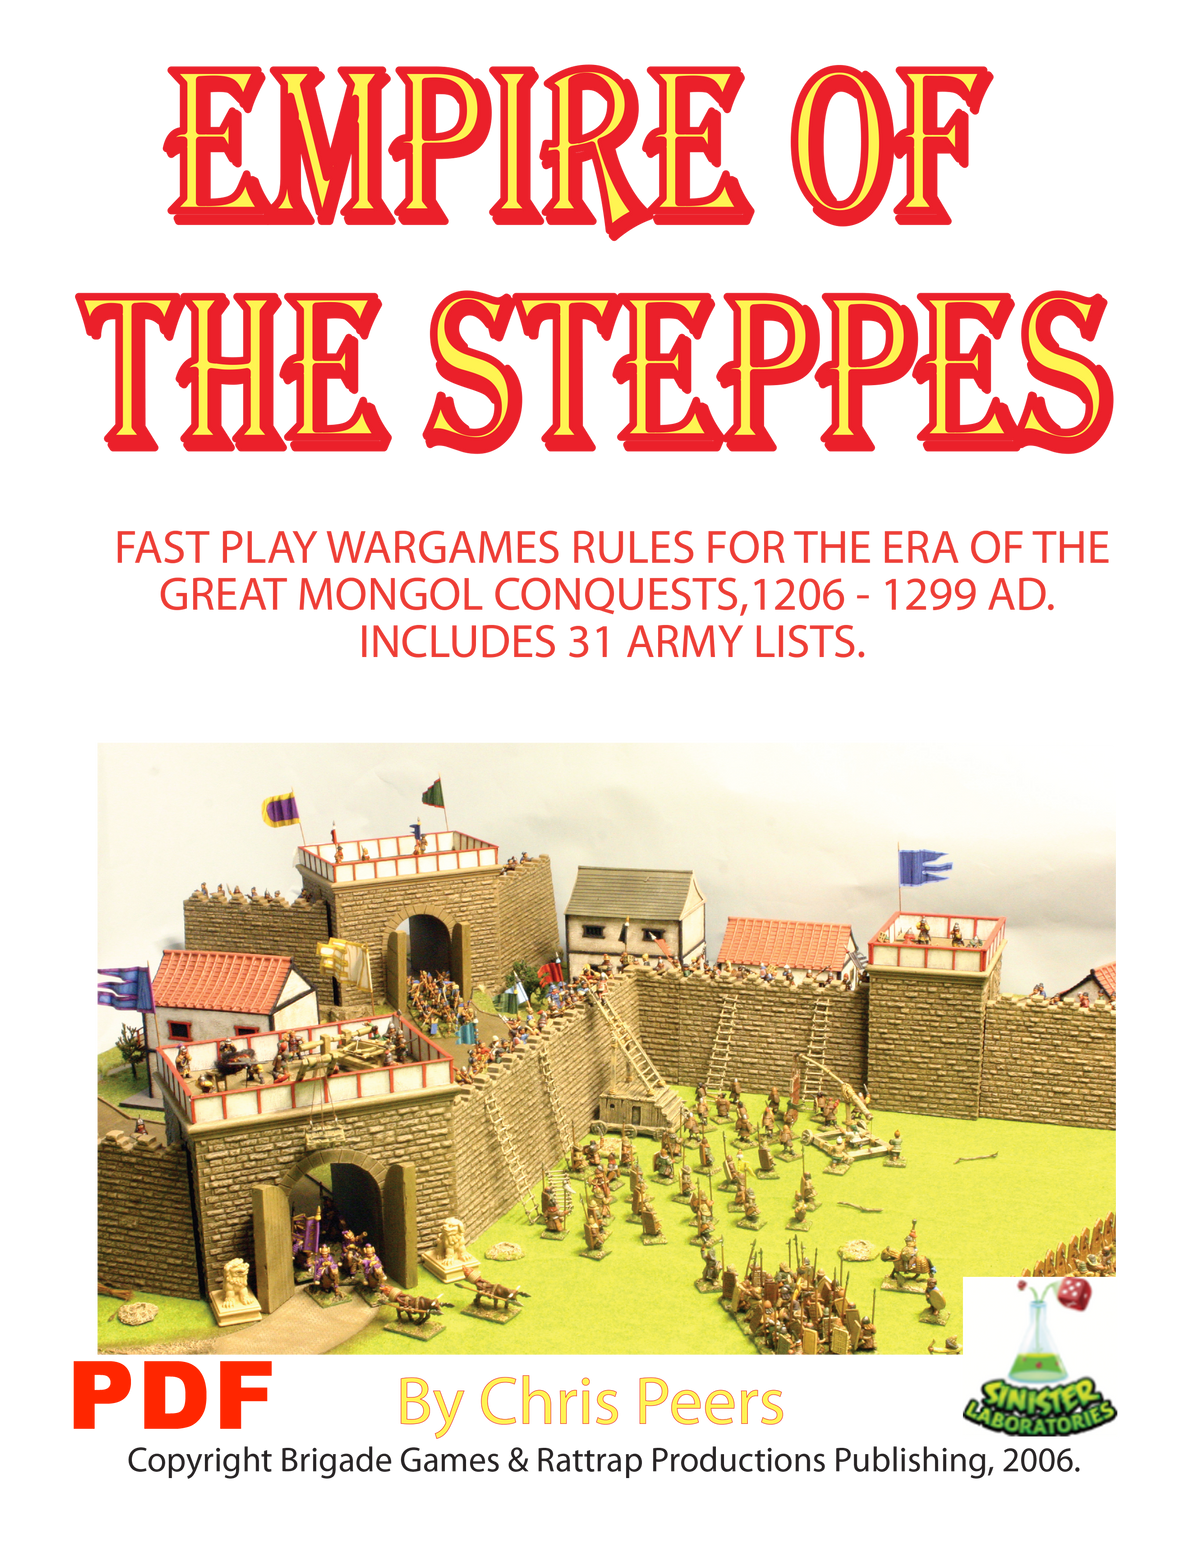 Empire of the Steppes - Mongol Conquest Wargame Rules - PDF (Digital Version)